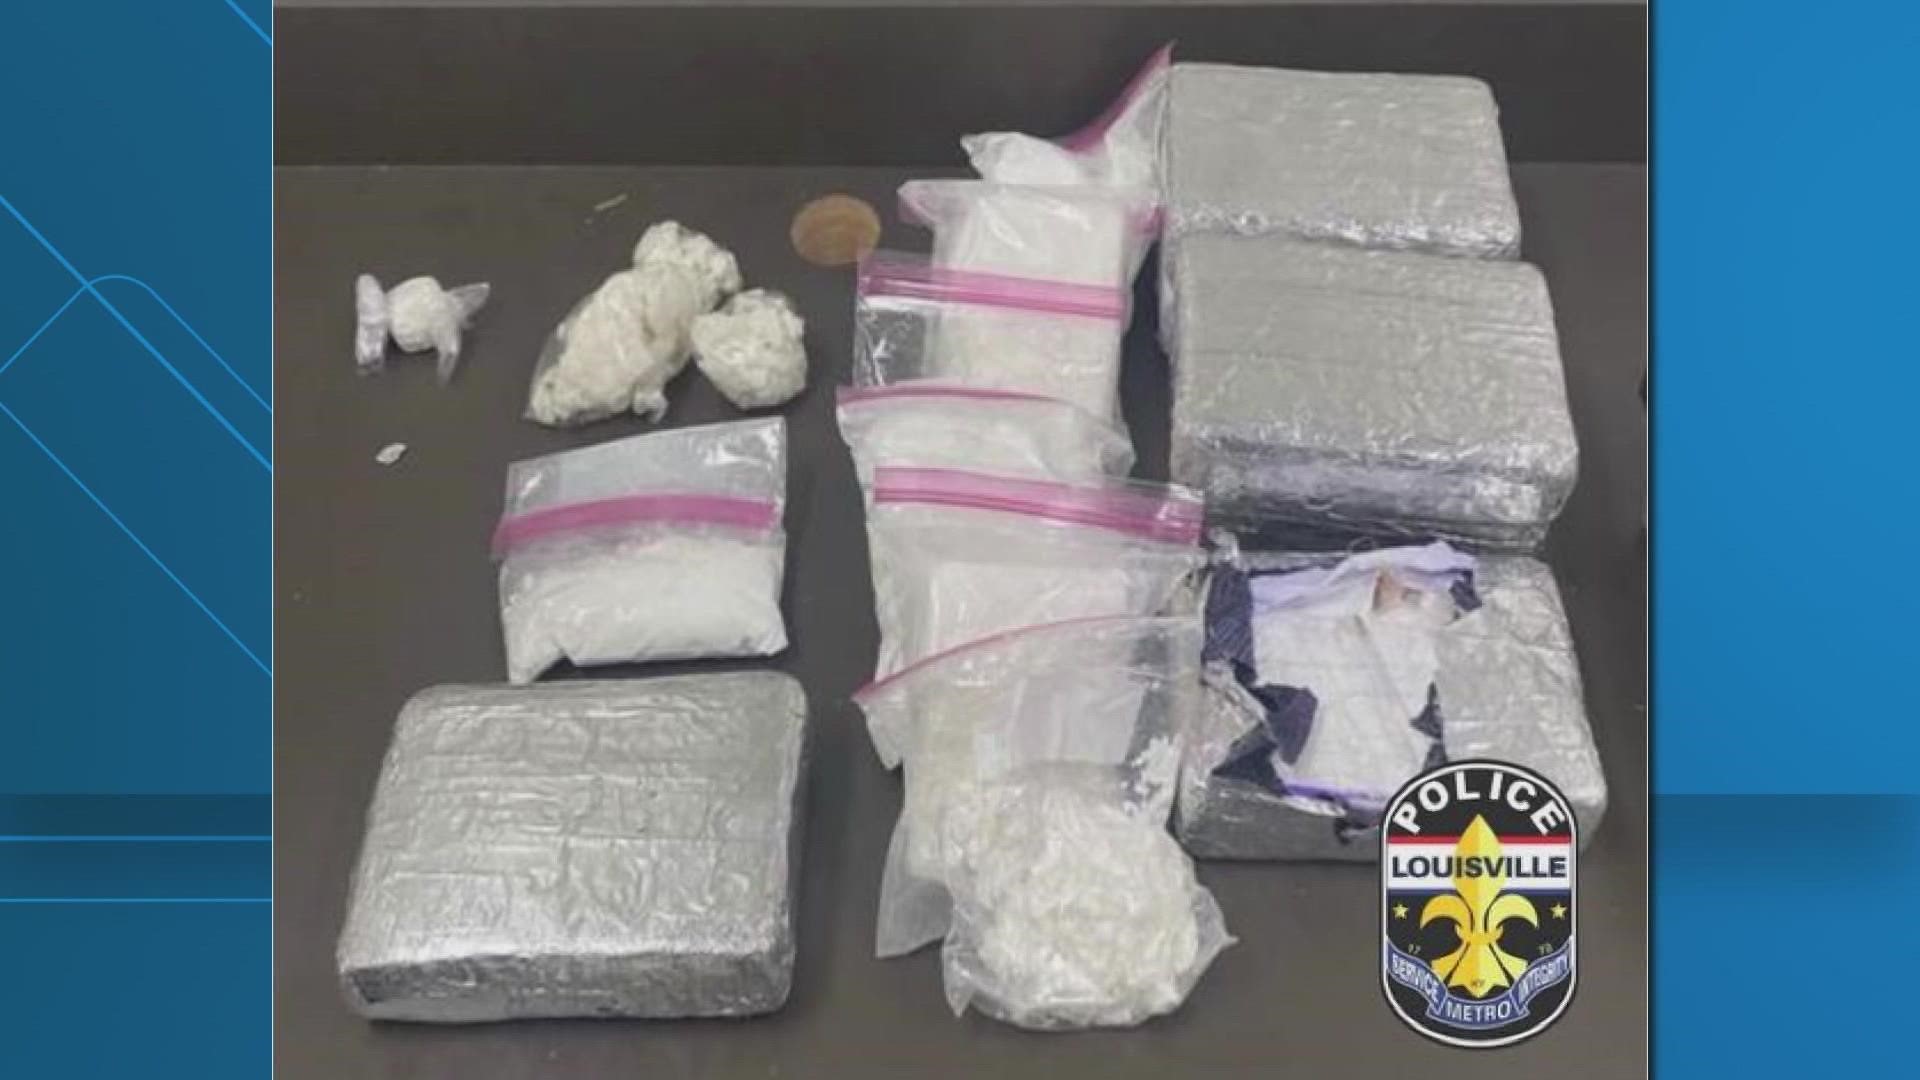 Officials say three men were found with over 17 pounds of cocaine, $100K in cash and an A-K 47.